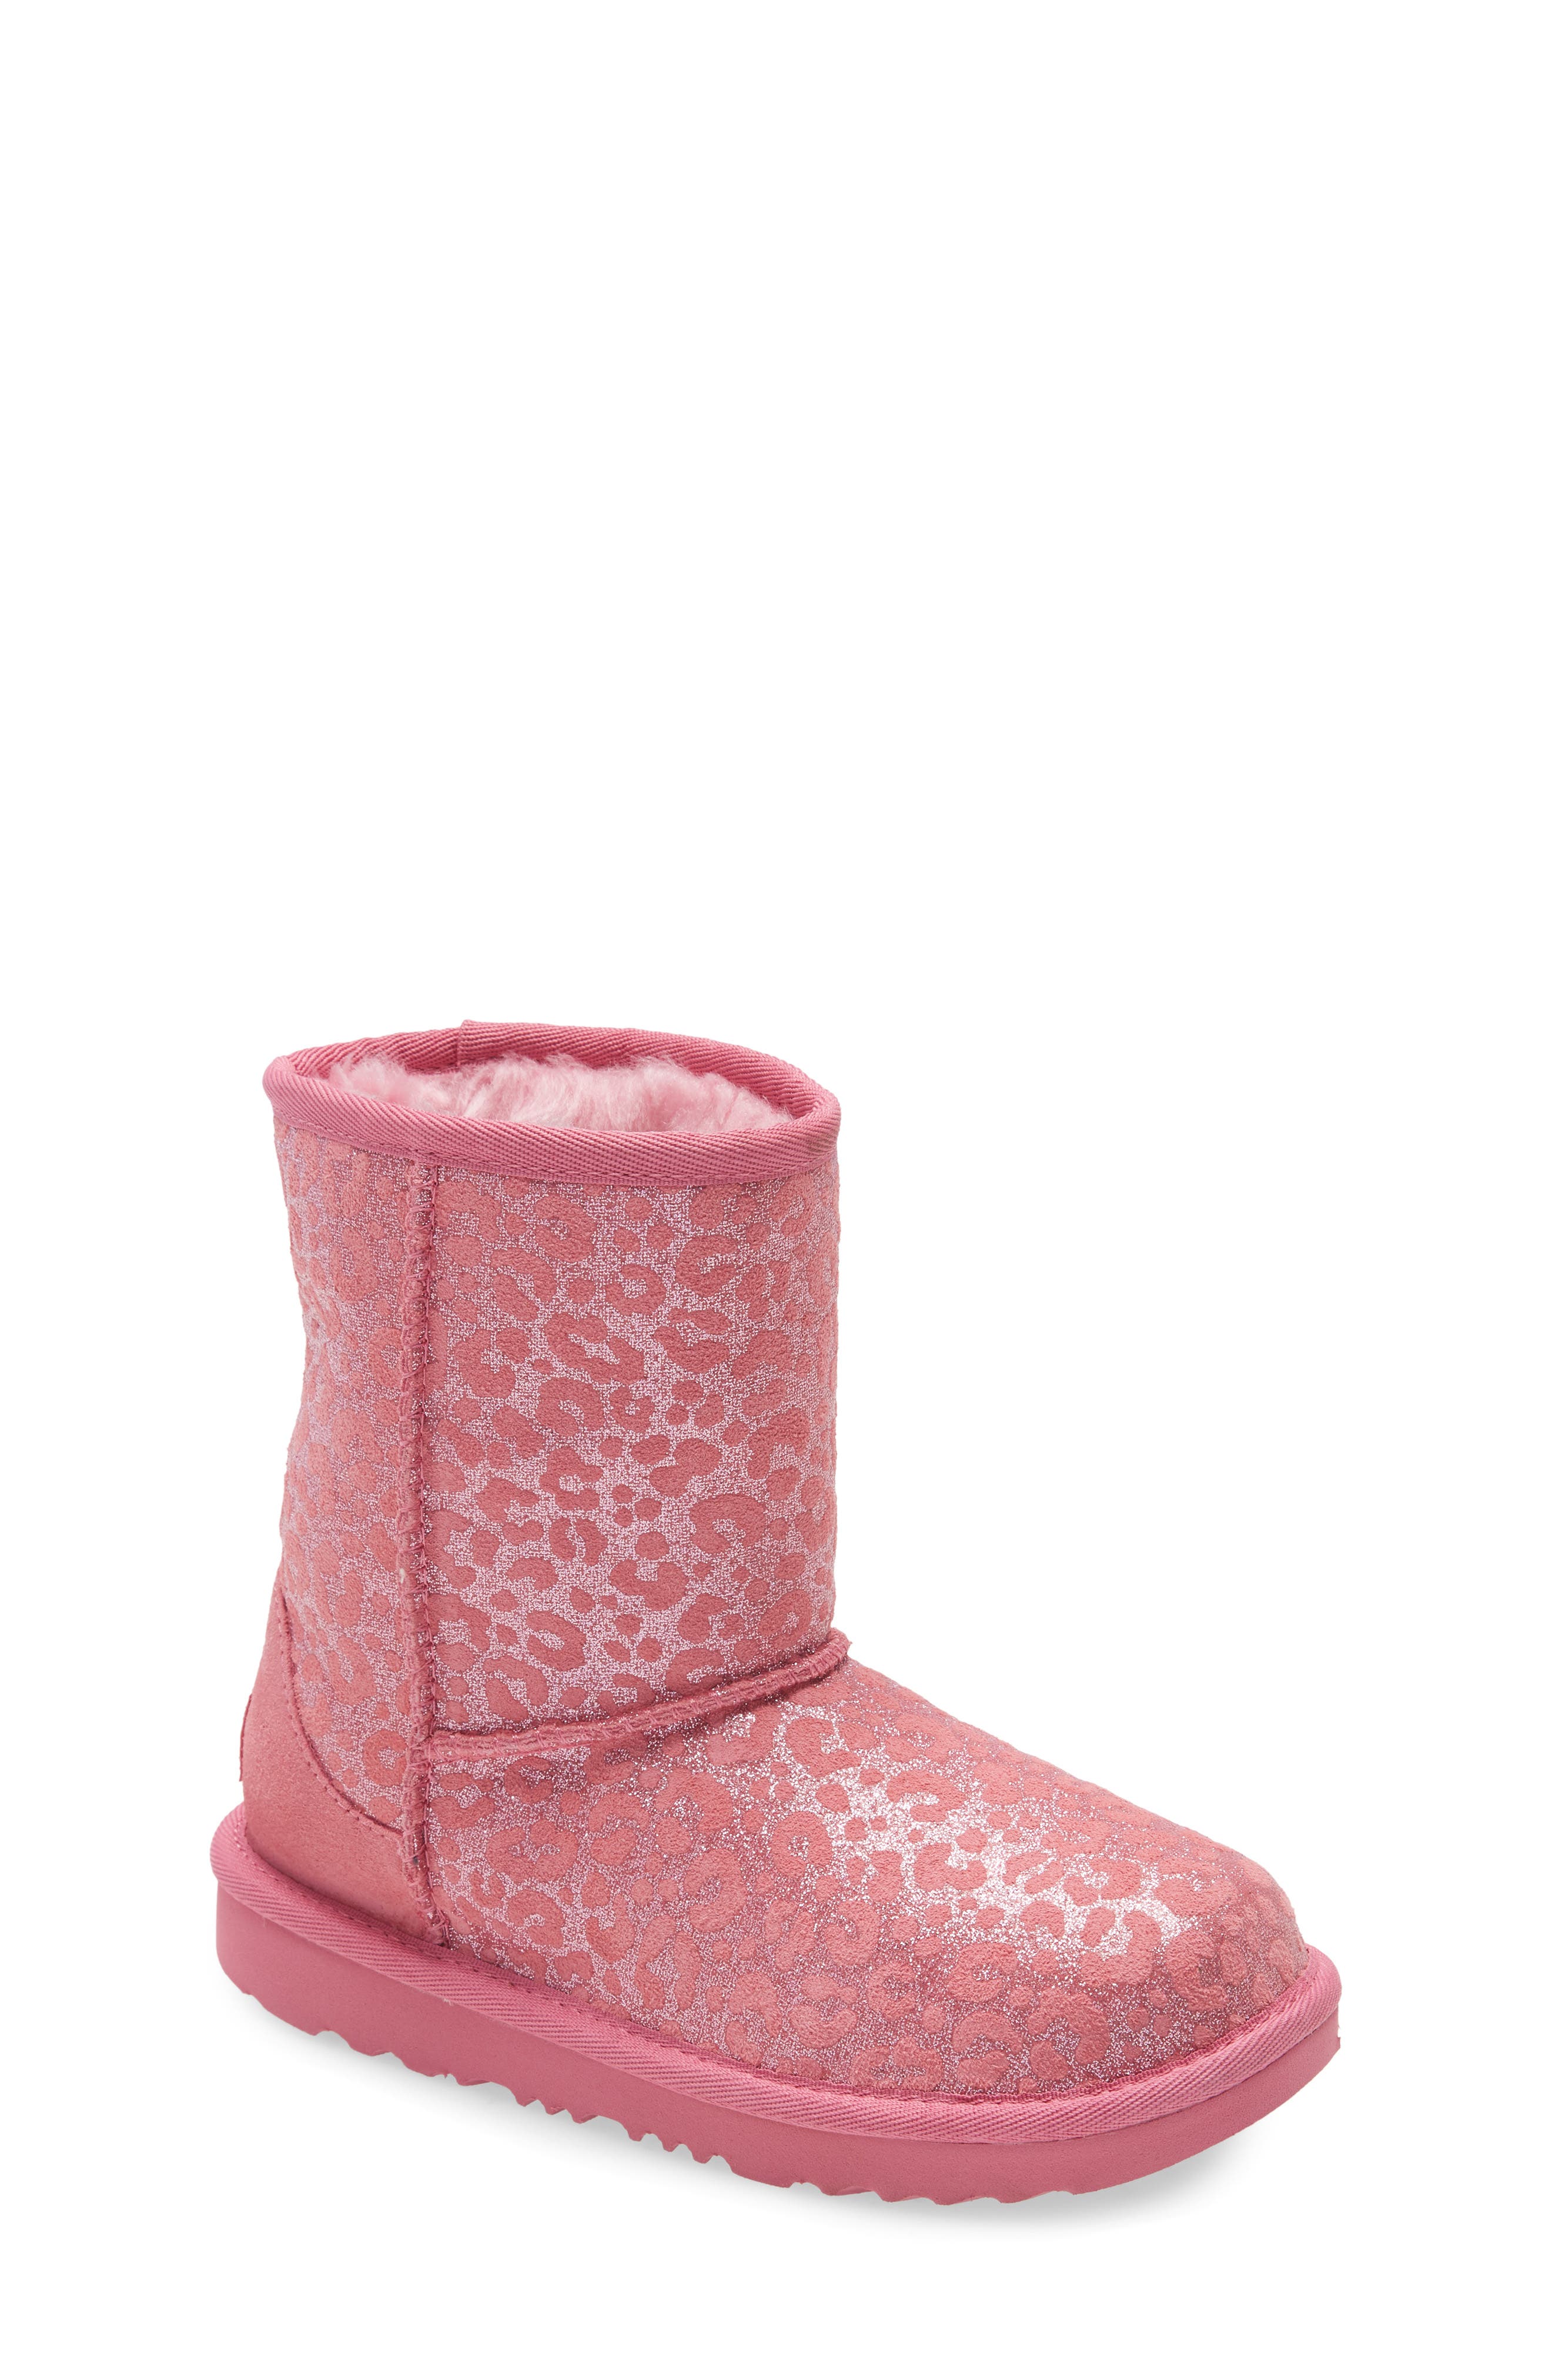 pink sparkly uggs